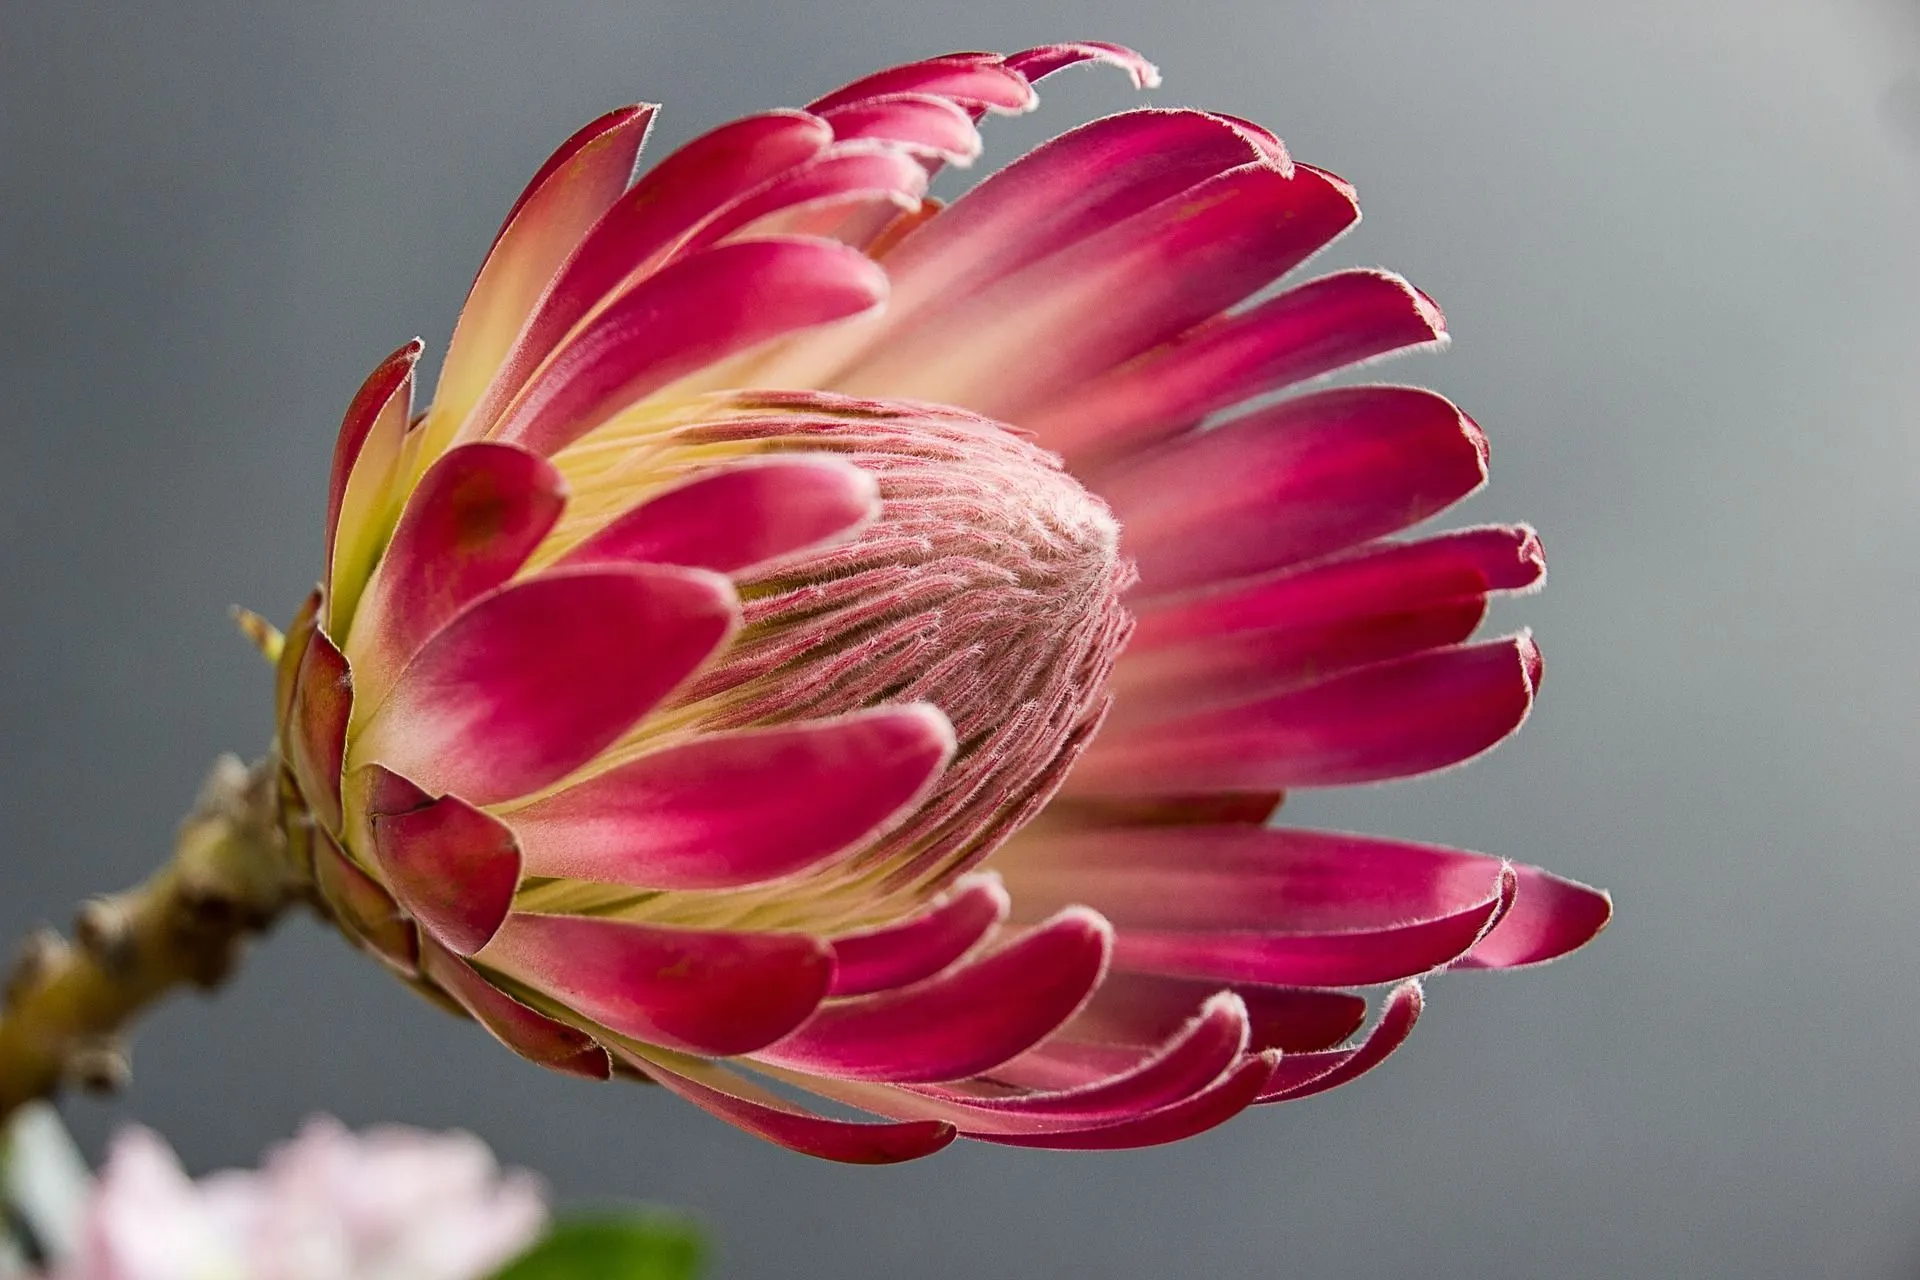 Queen Protea is found in South Africa.